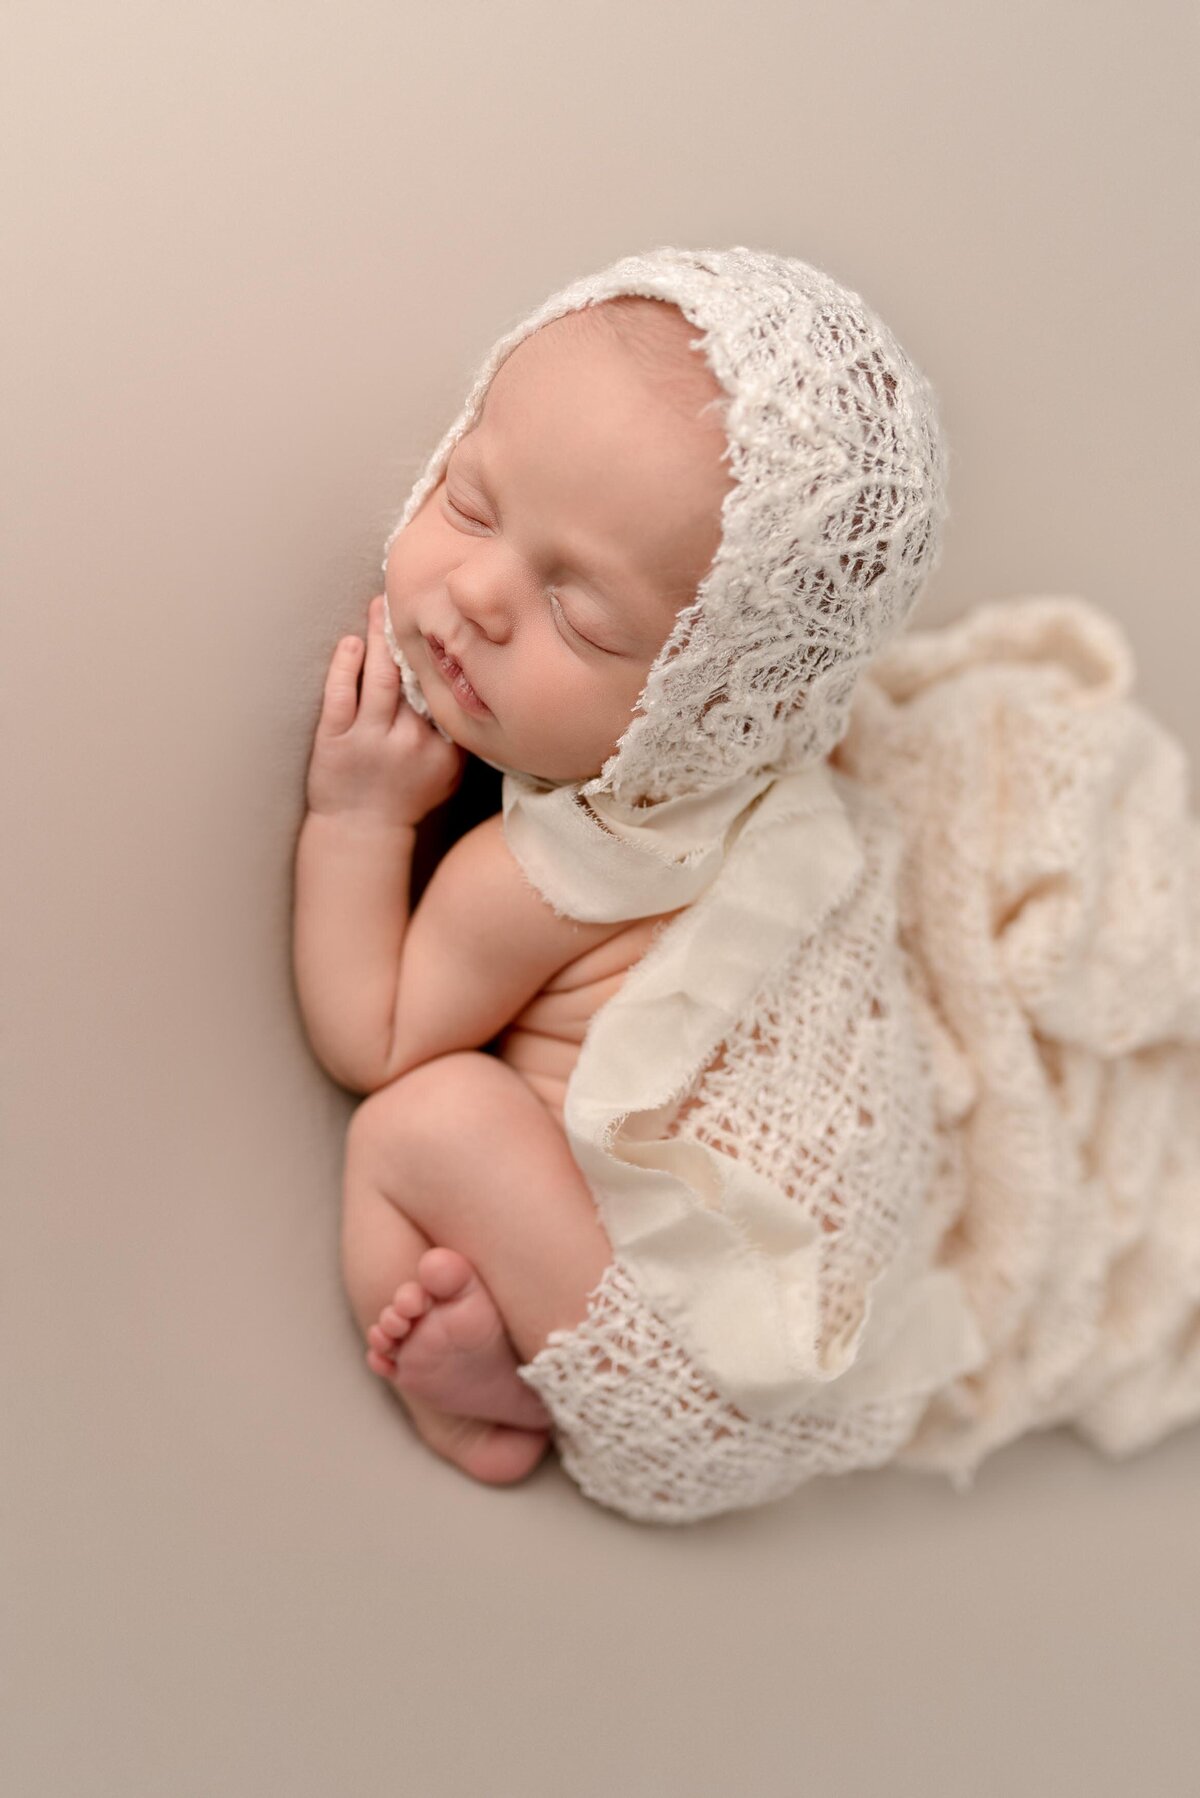 Newborn baby girl laying on her tummy in the bum up position wearing a lace bonnet and lace wrap laying over back.